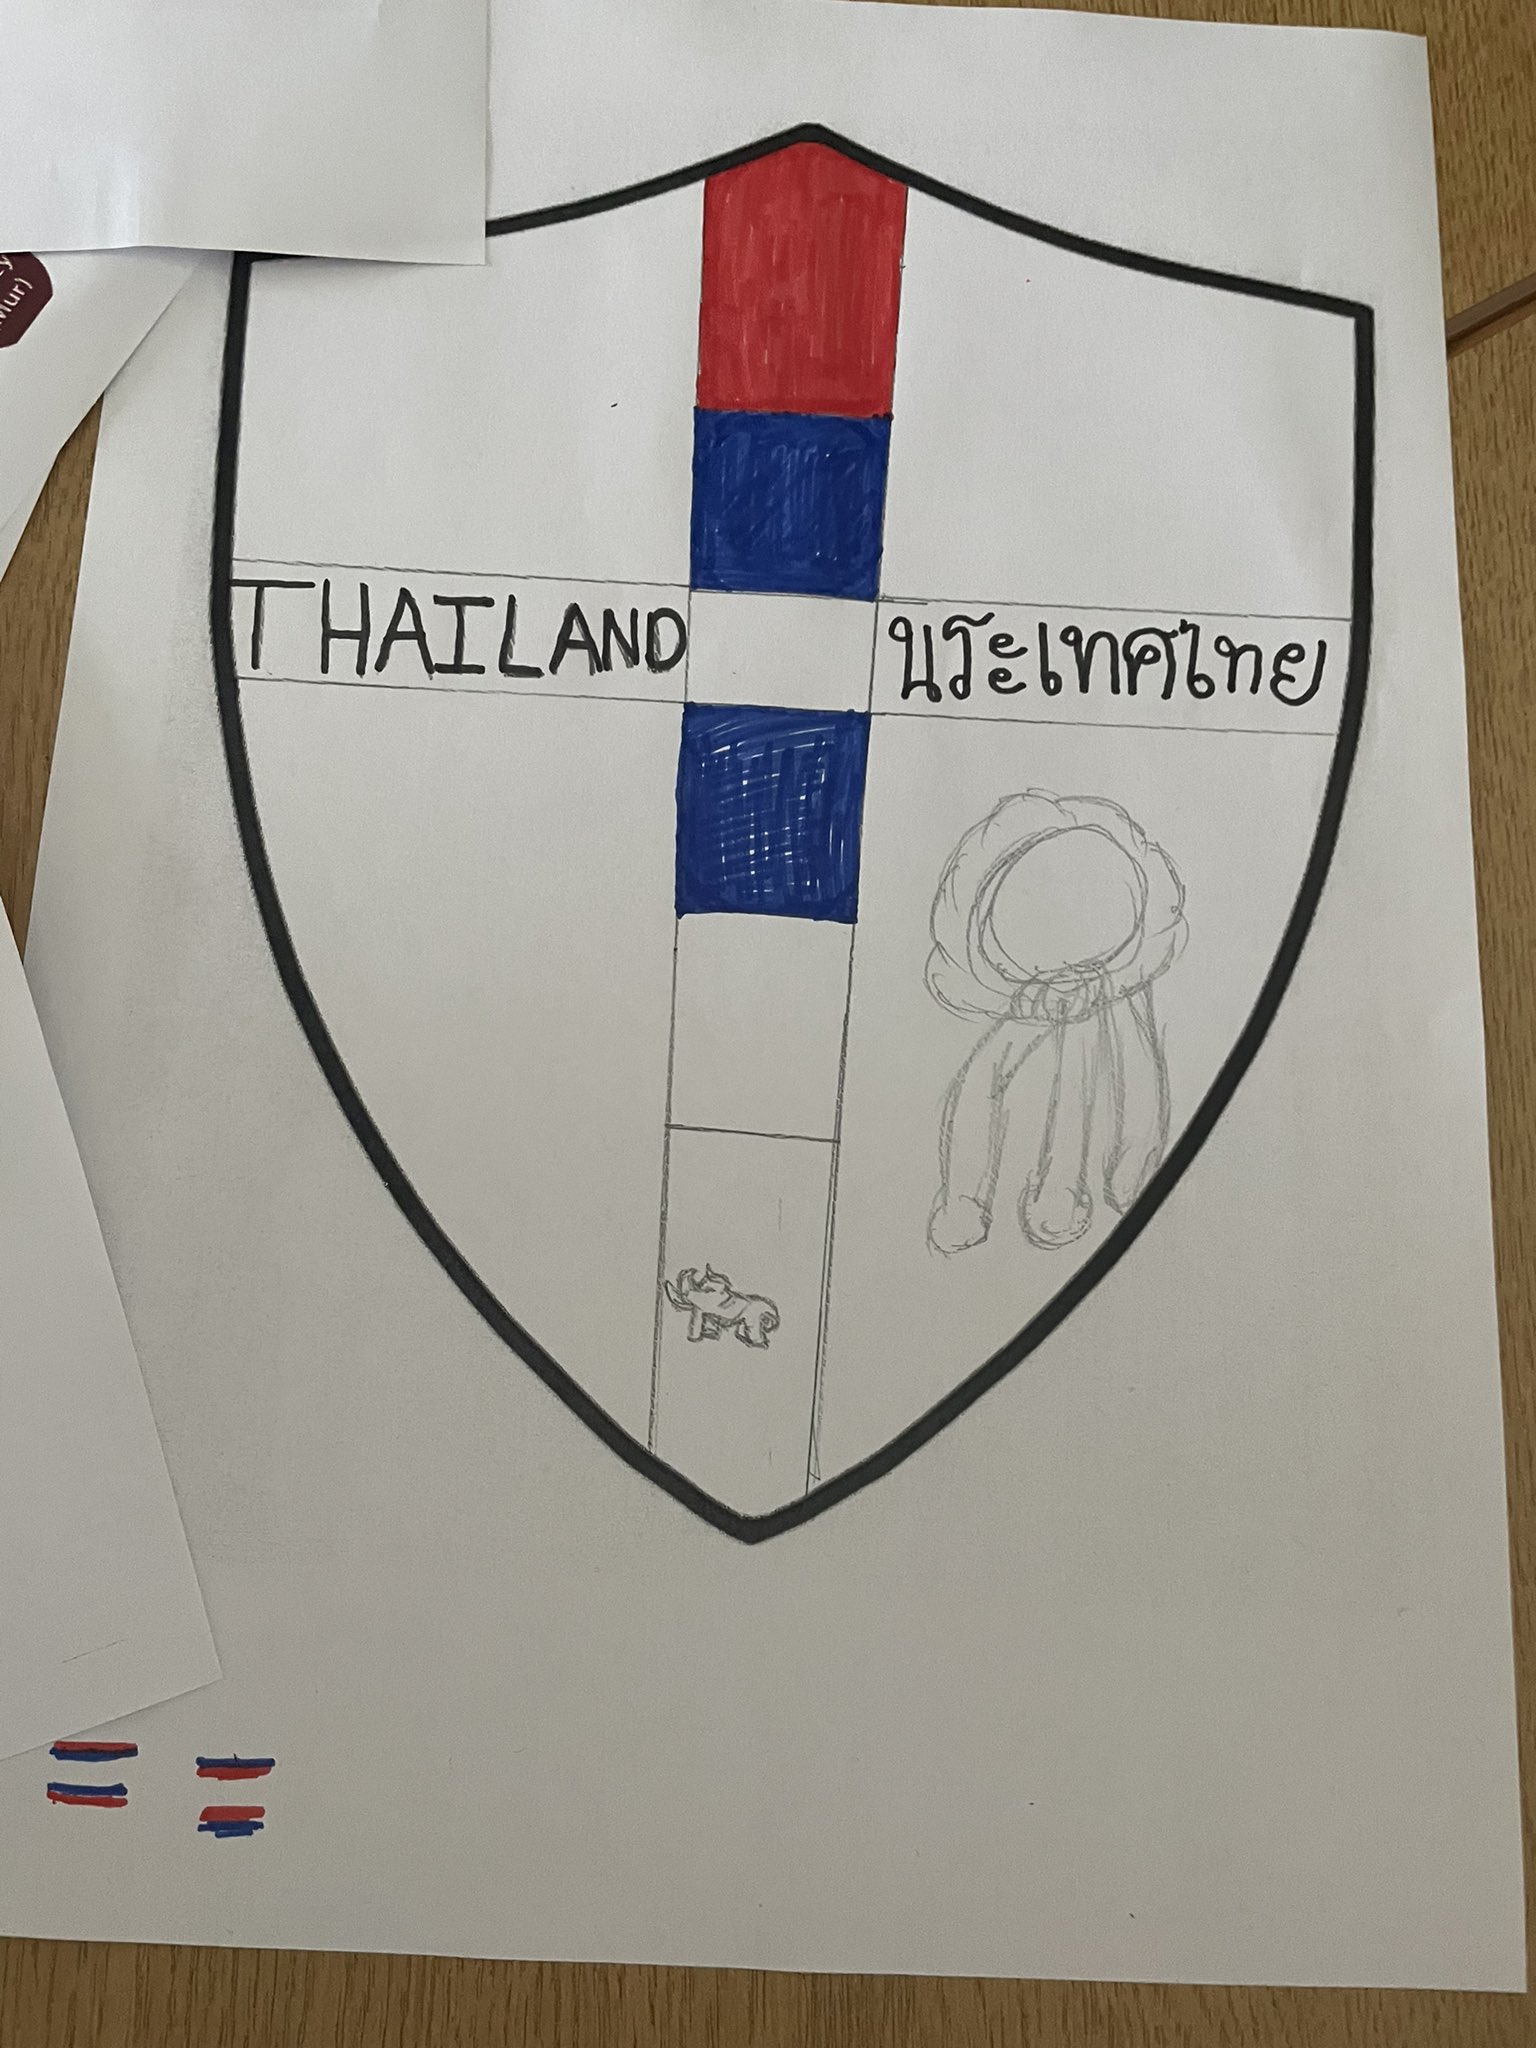 A shield with a cross through the middle. Thailand is written in English and Thai  across the middle with a flower in the lower quarter